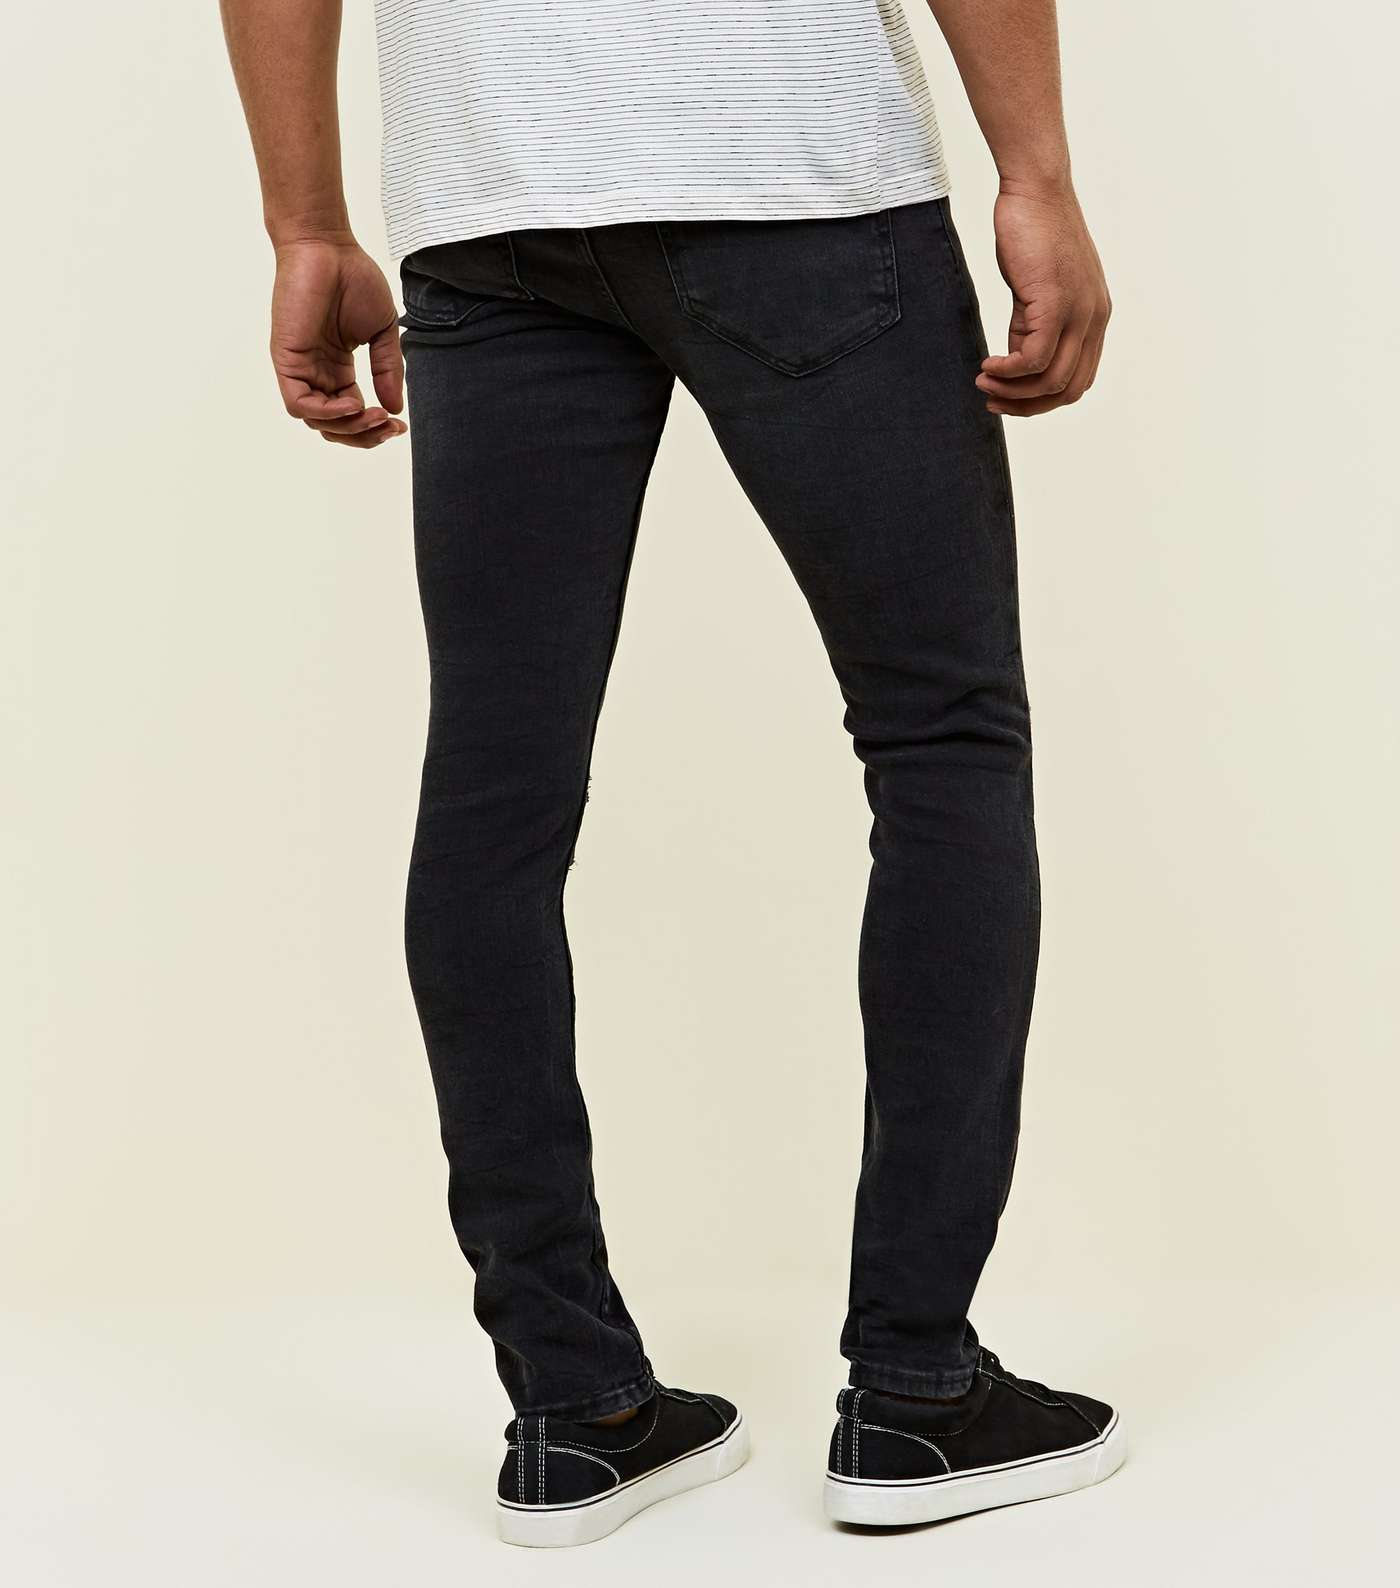 Black Washed Ripped Skinny Stretch Jeans Image 3